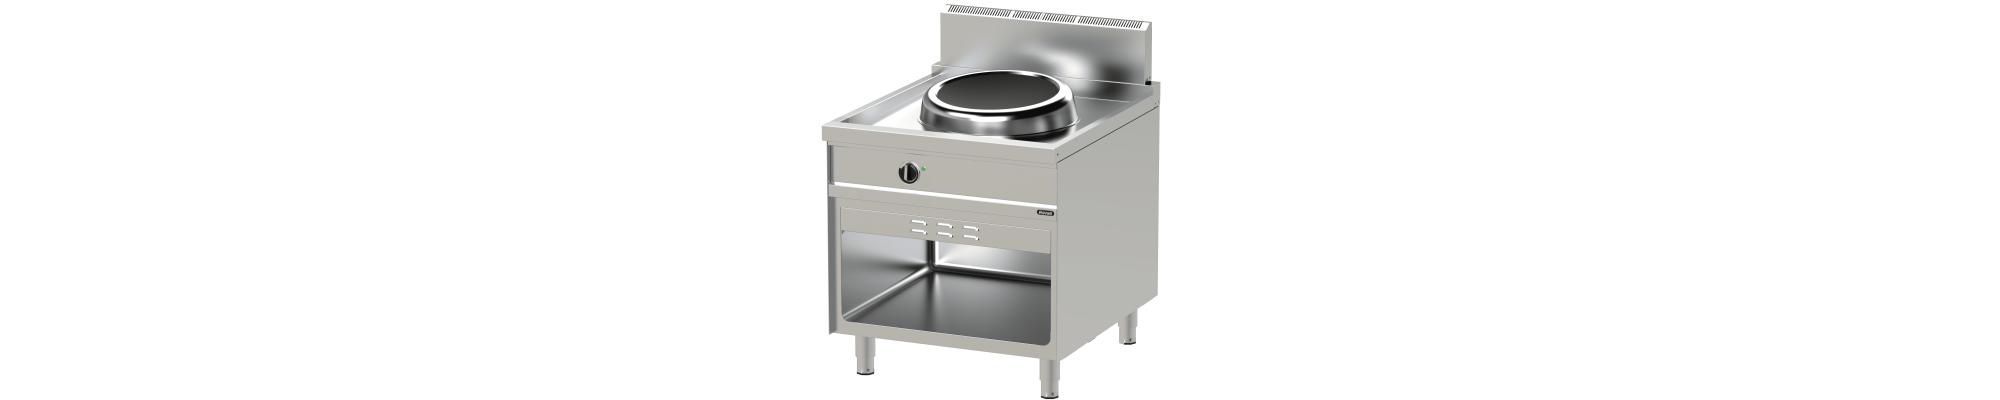 WOK INDUCTION – SERIE 900